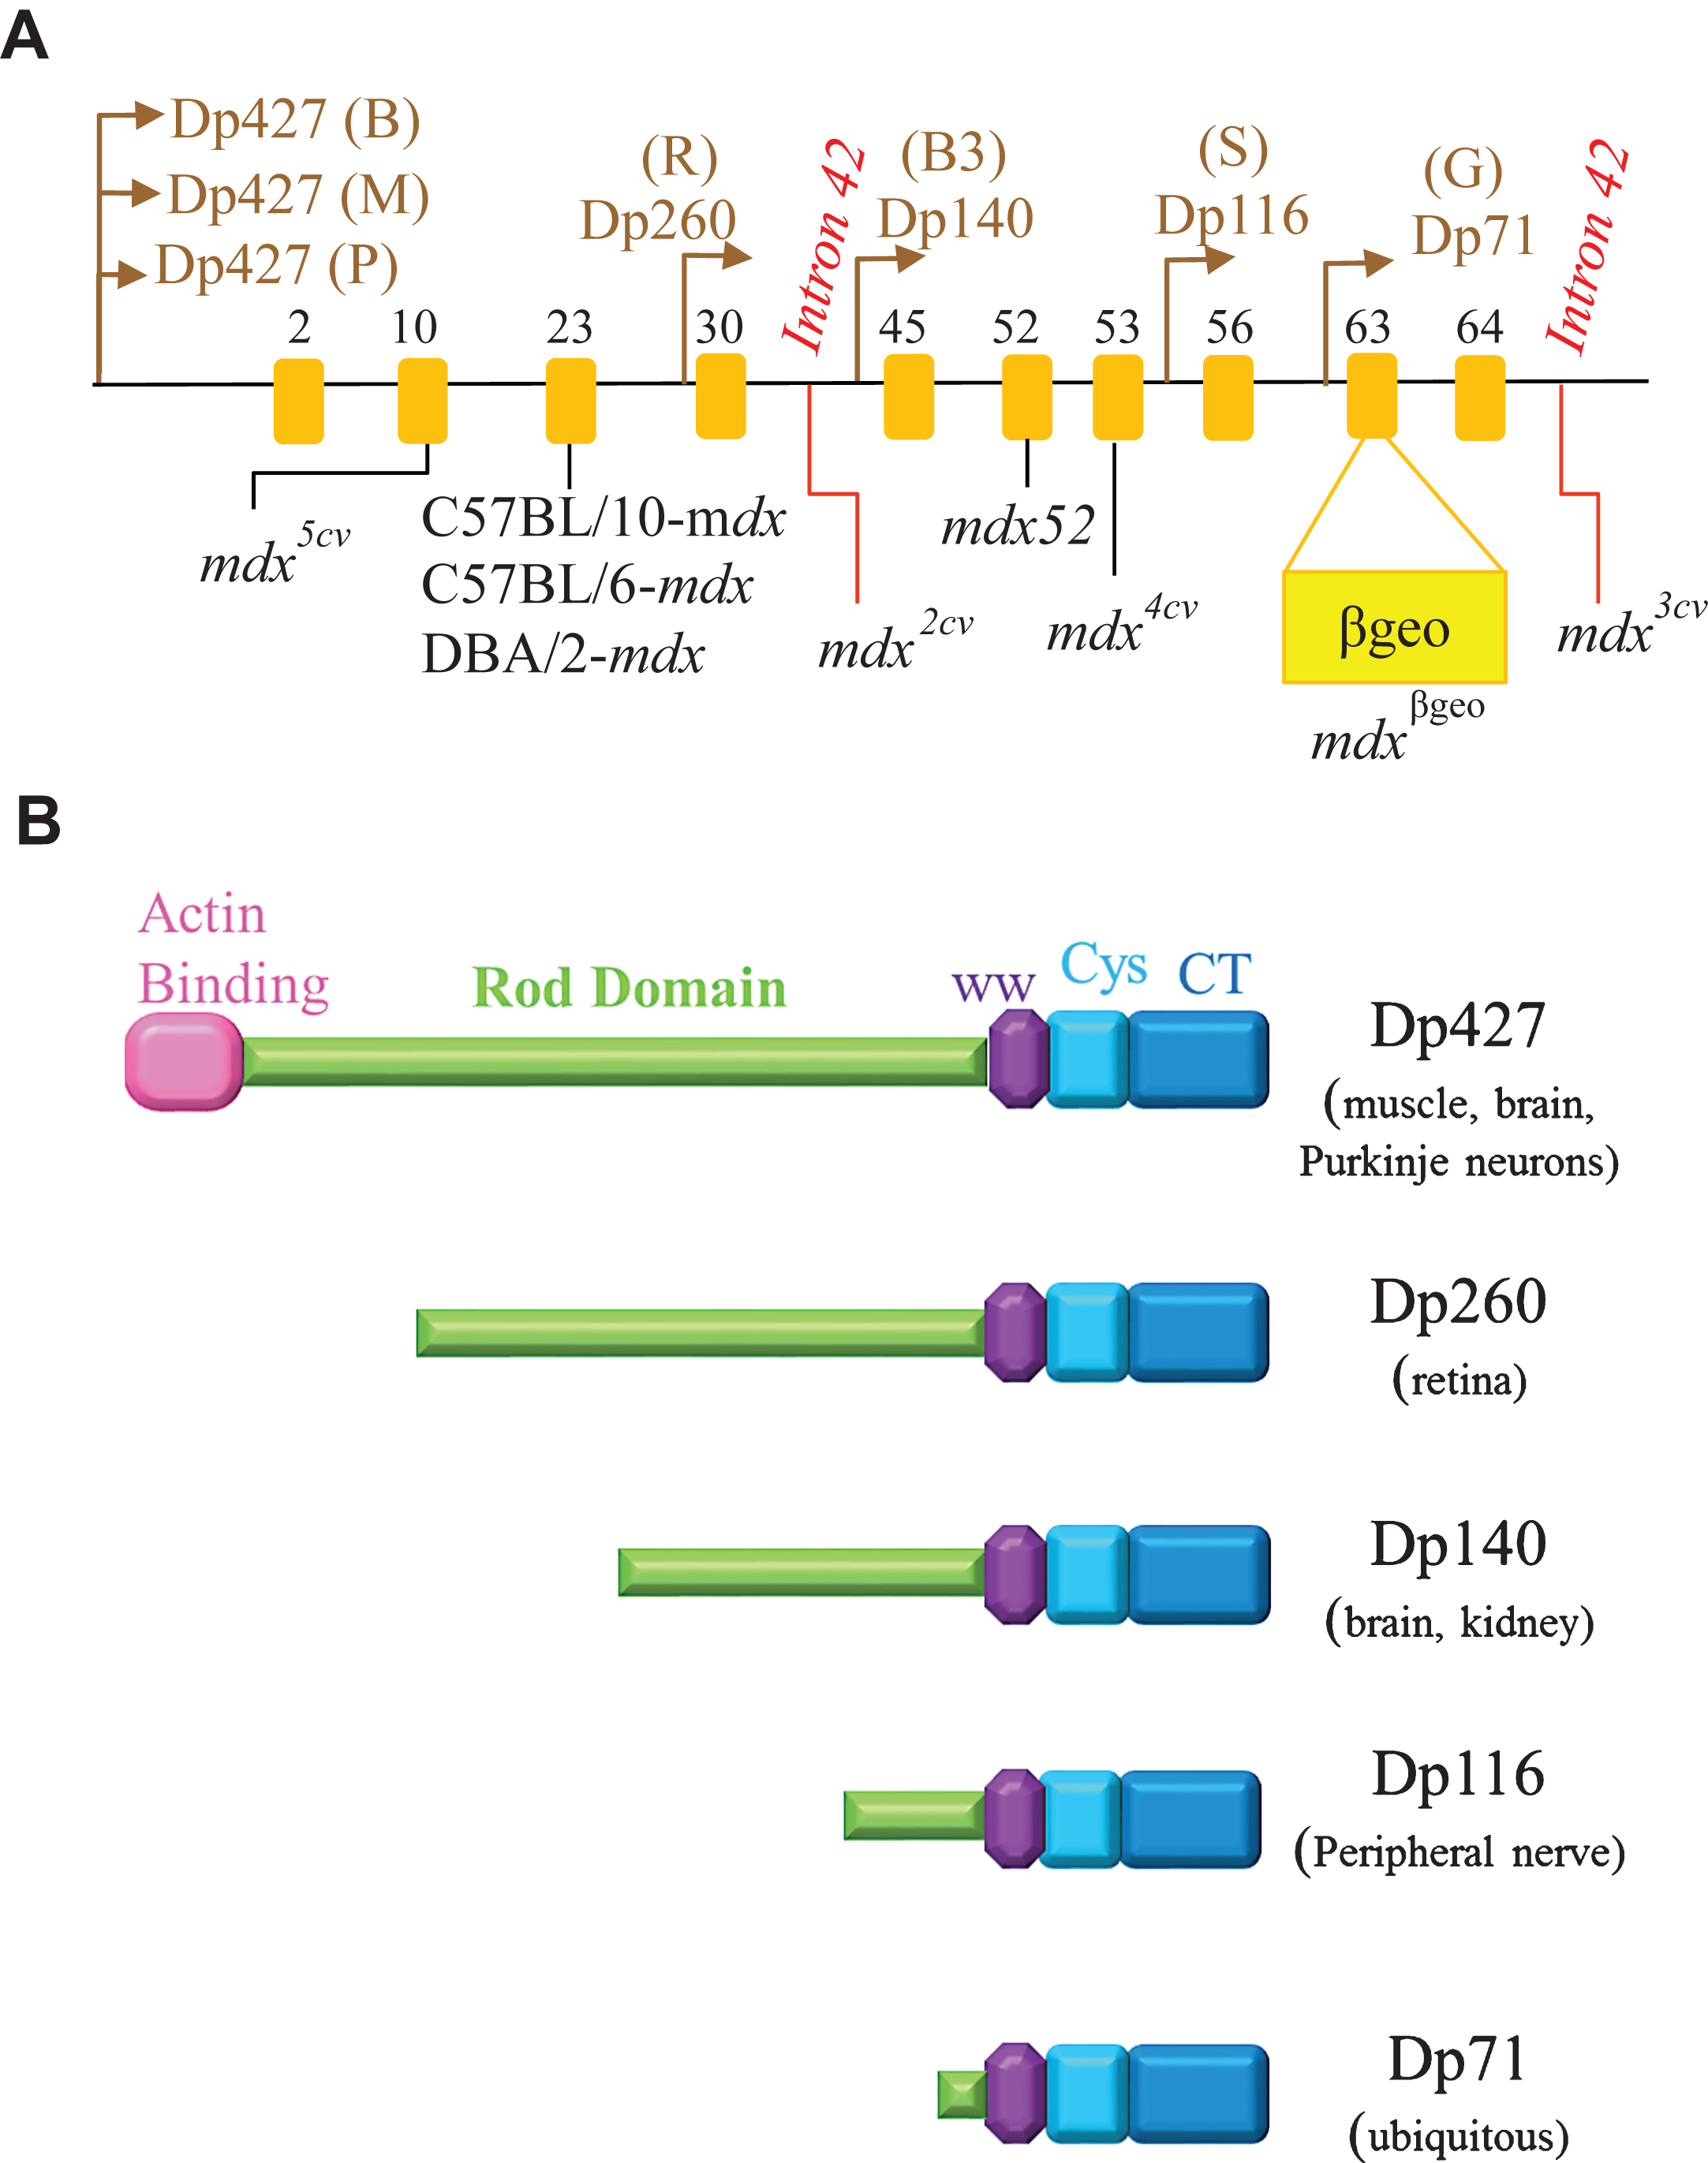 The promoters and isoforms of the dystrophin gene, and the location of mutations in murine models. (A) The location of different promoters (brain (B), muscle (M), Purkinje (P), retinal (R), brain-3 (B3), Schwann cell (S), and general (G)) of the dystrophin gene is displayed alongside with the location of mutations observed in some murine models (and also illustrates the insertion of the ROSAβgeo in 3’ end of exon 63 in mdxβgeo). Yellow rectangles represent exons. (B) The promoters of Dp427 results in “full-length” dystrophin protein (consisting of the N-terminal actin-binding domain, rod domain, WW domain, cysteine rich domain (Cys) and C-terminal domain (CT)). The remaining promoters lead to shortened dystrophin isoforms.